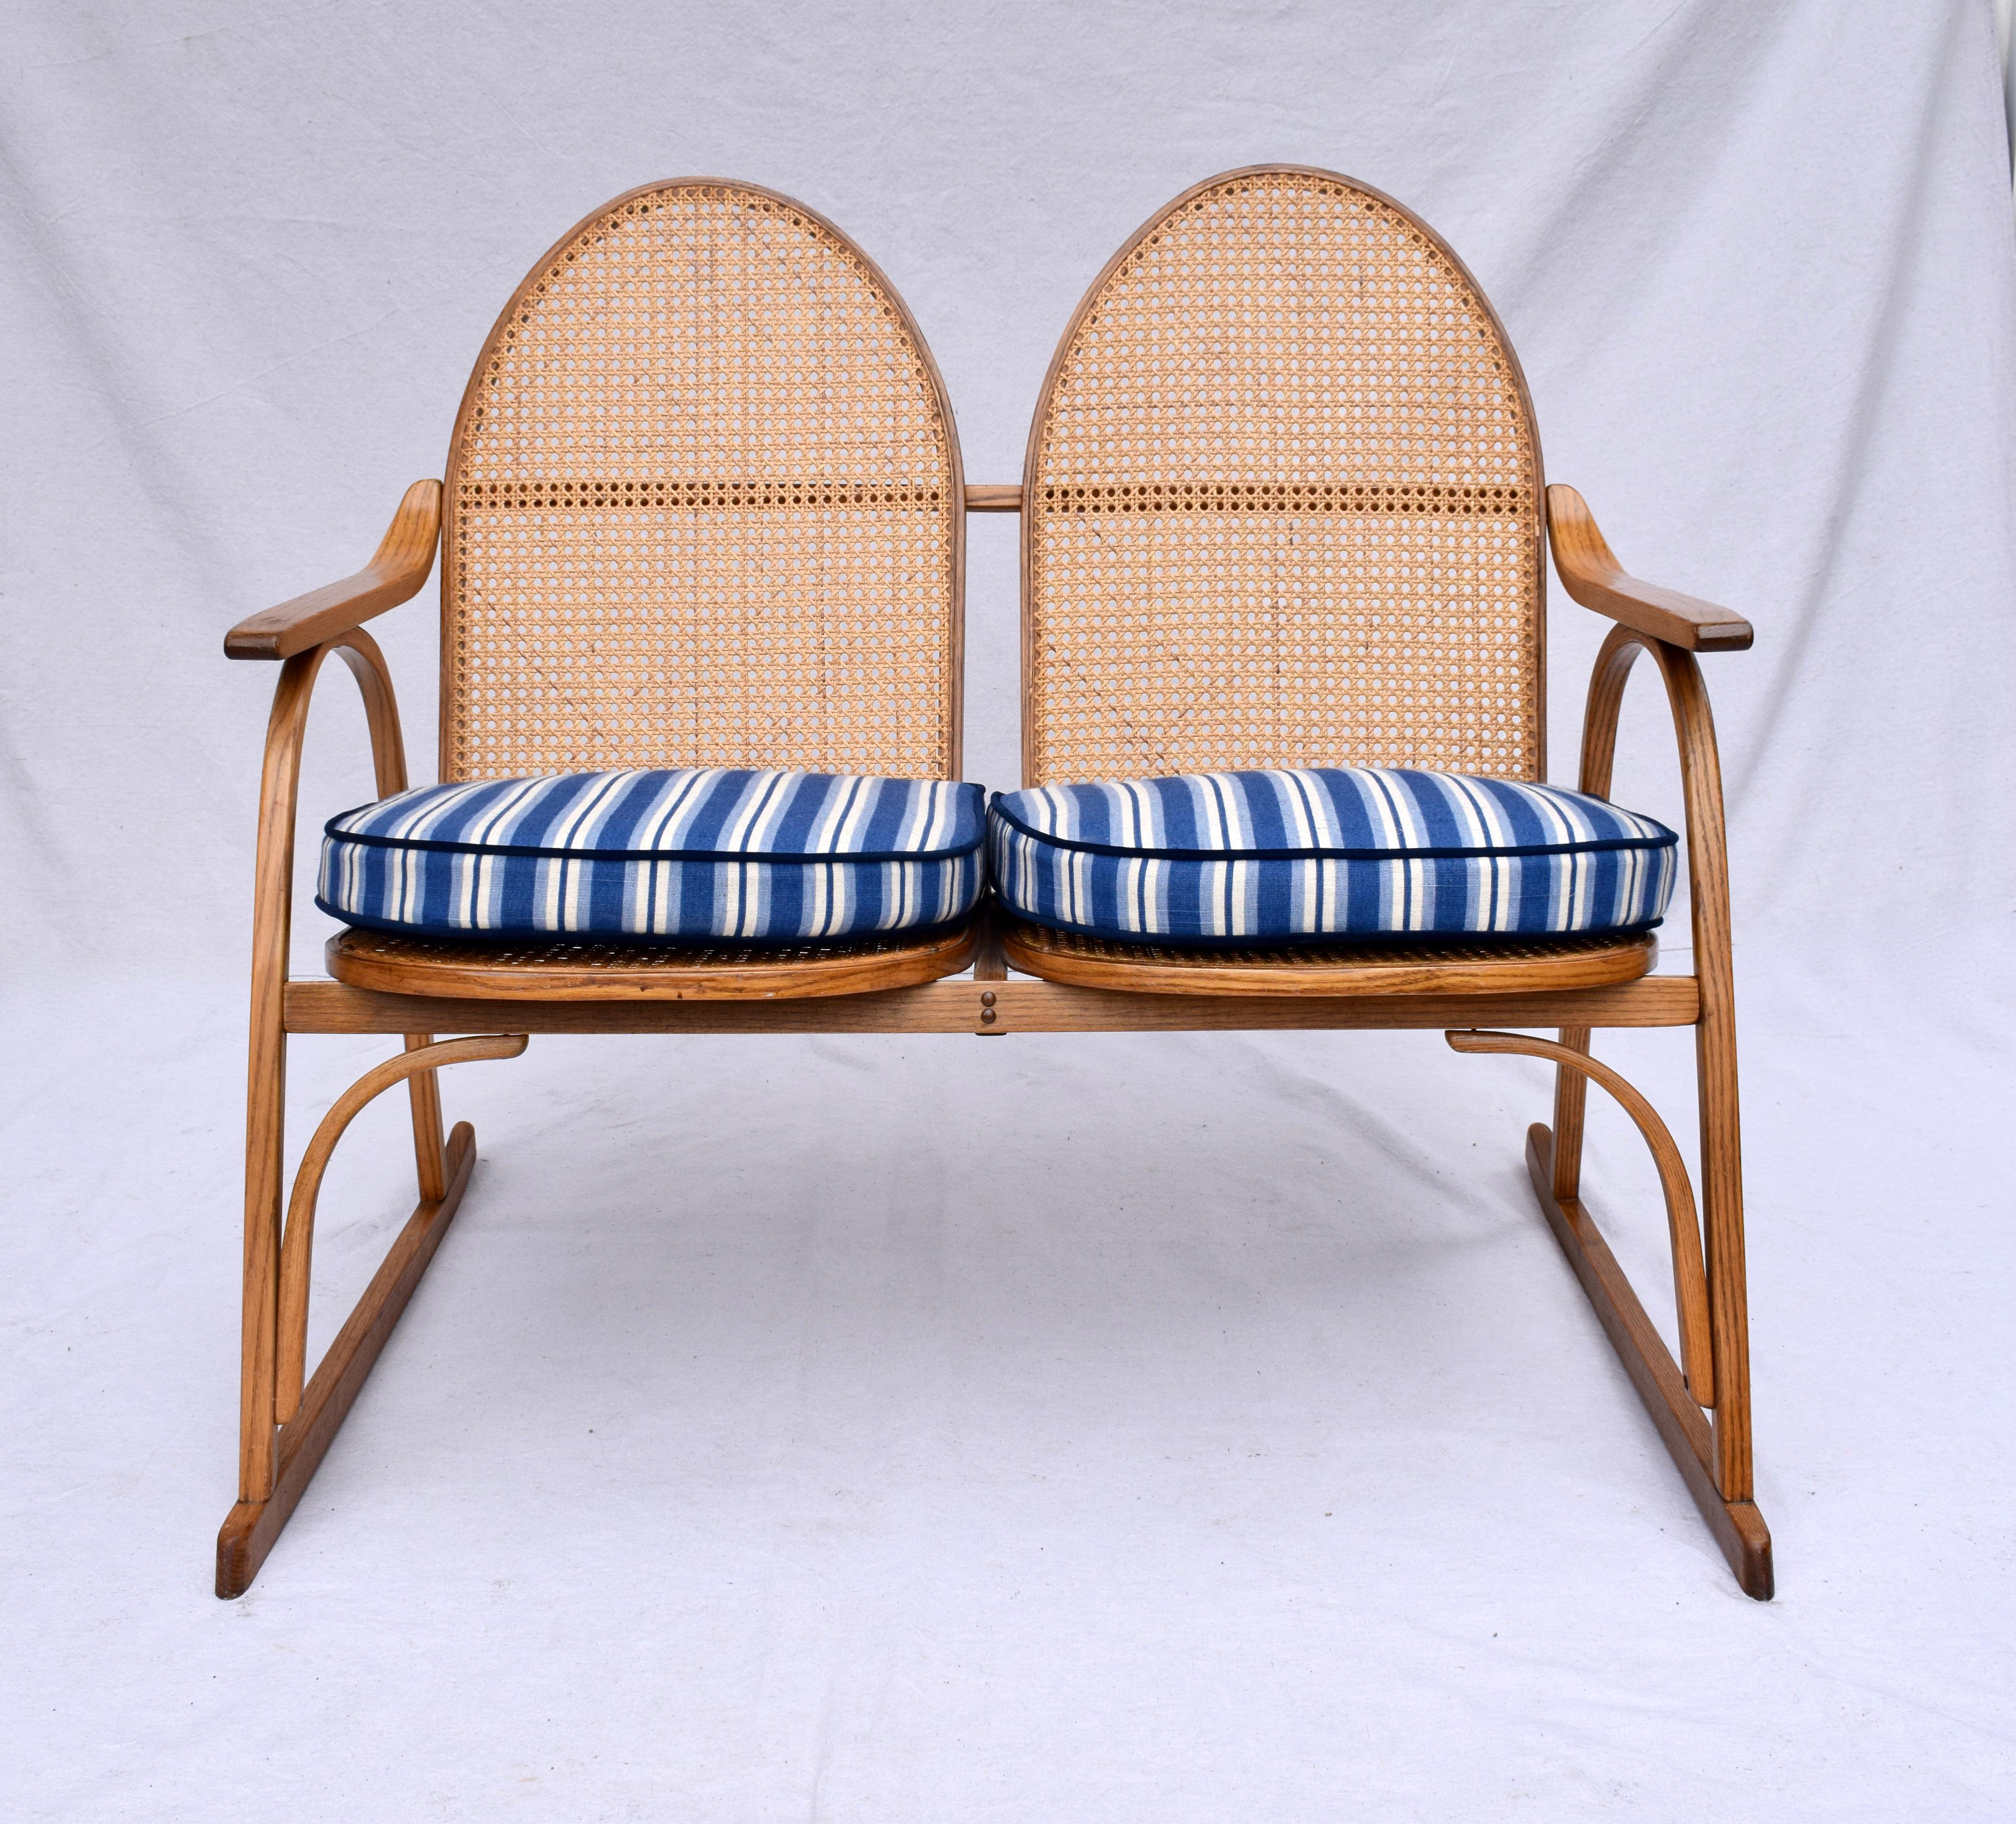 Classic Adirondack Vermont Tubes bent oak two seat bench settee with new custom cushions upholstered in vintage new stock blue & white striped linen. Seldom seen caned construction Signed.